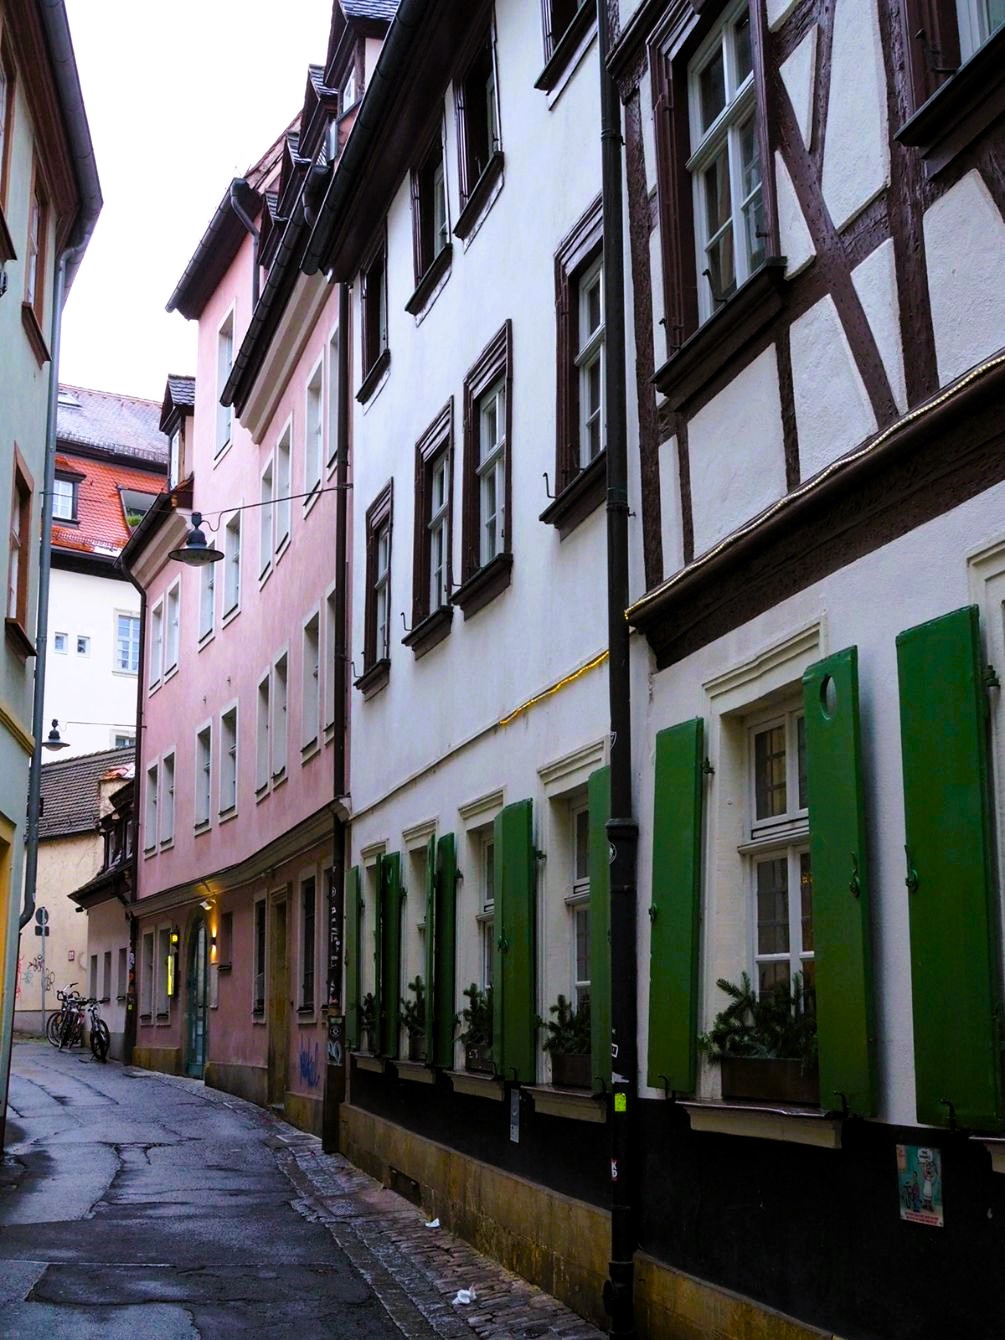 A small alleyway curves away from the camera, a white half-timbered house with green shutters neighbours a pink house with white windowframes in a charming scene.